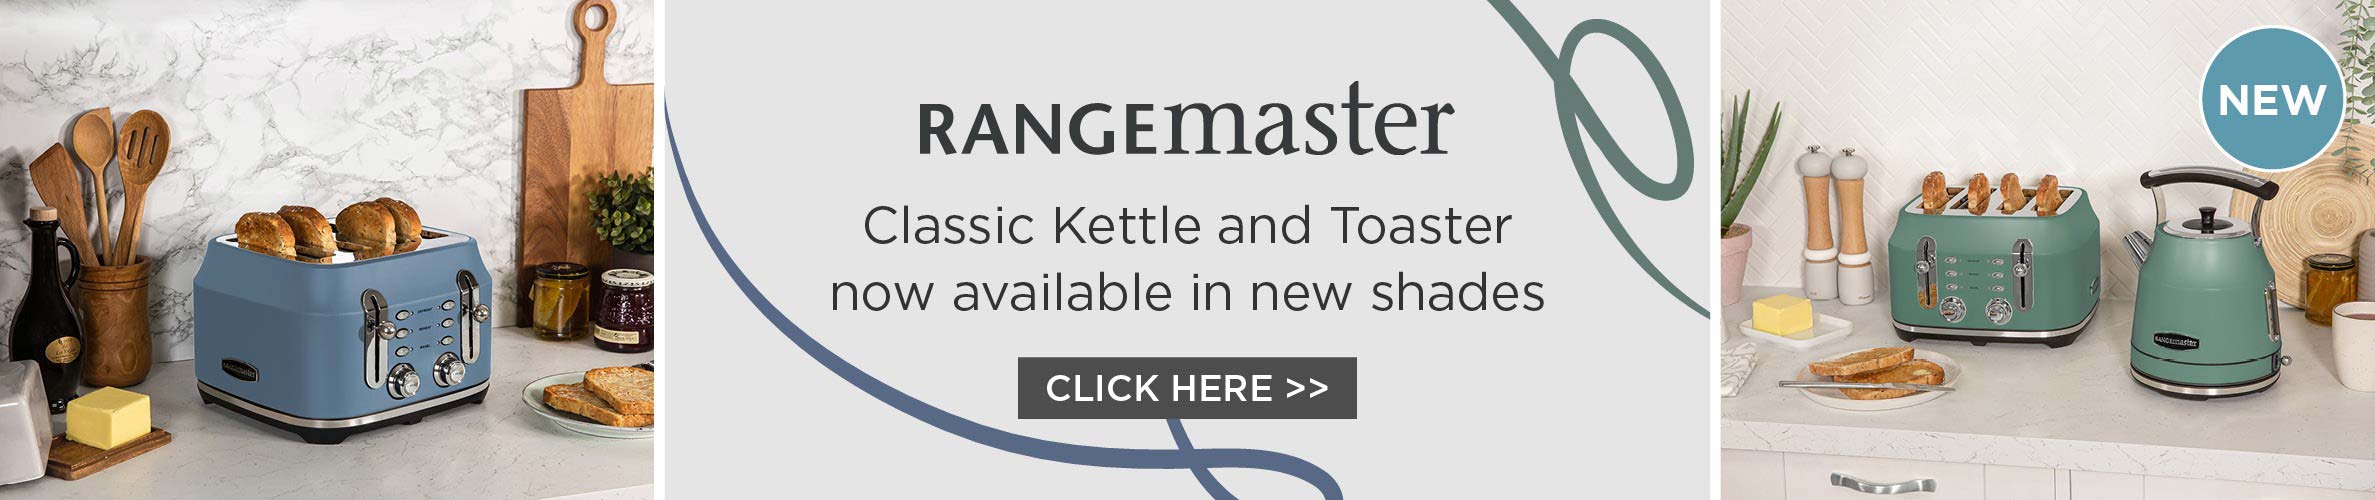 Classic kettle and Toaster